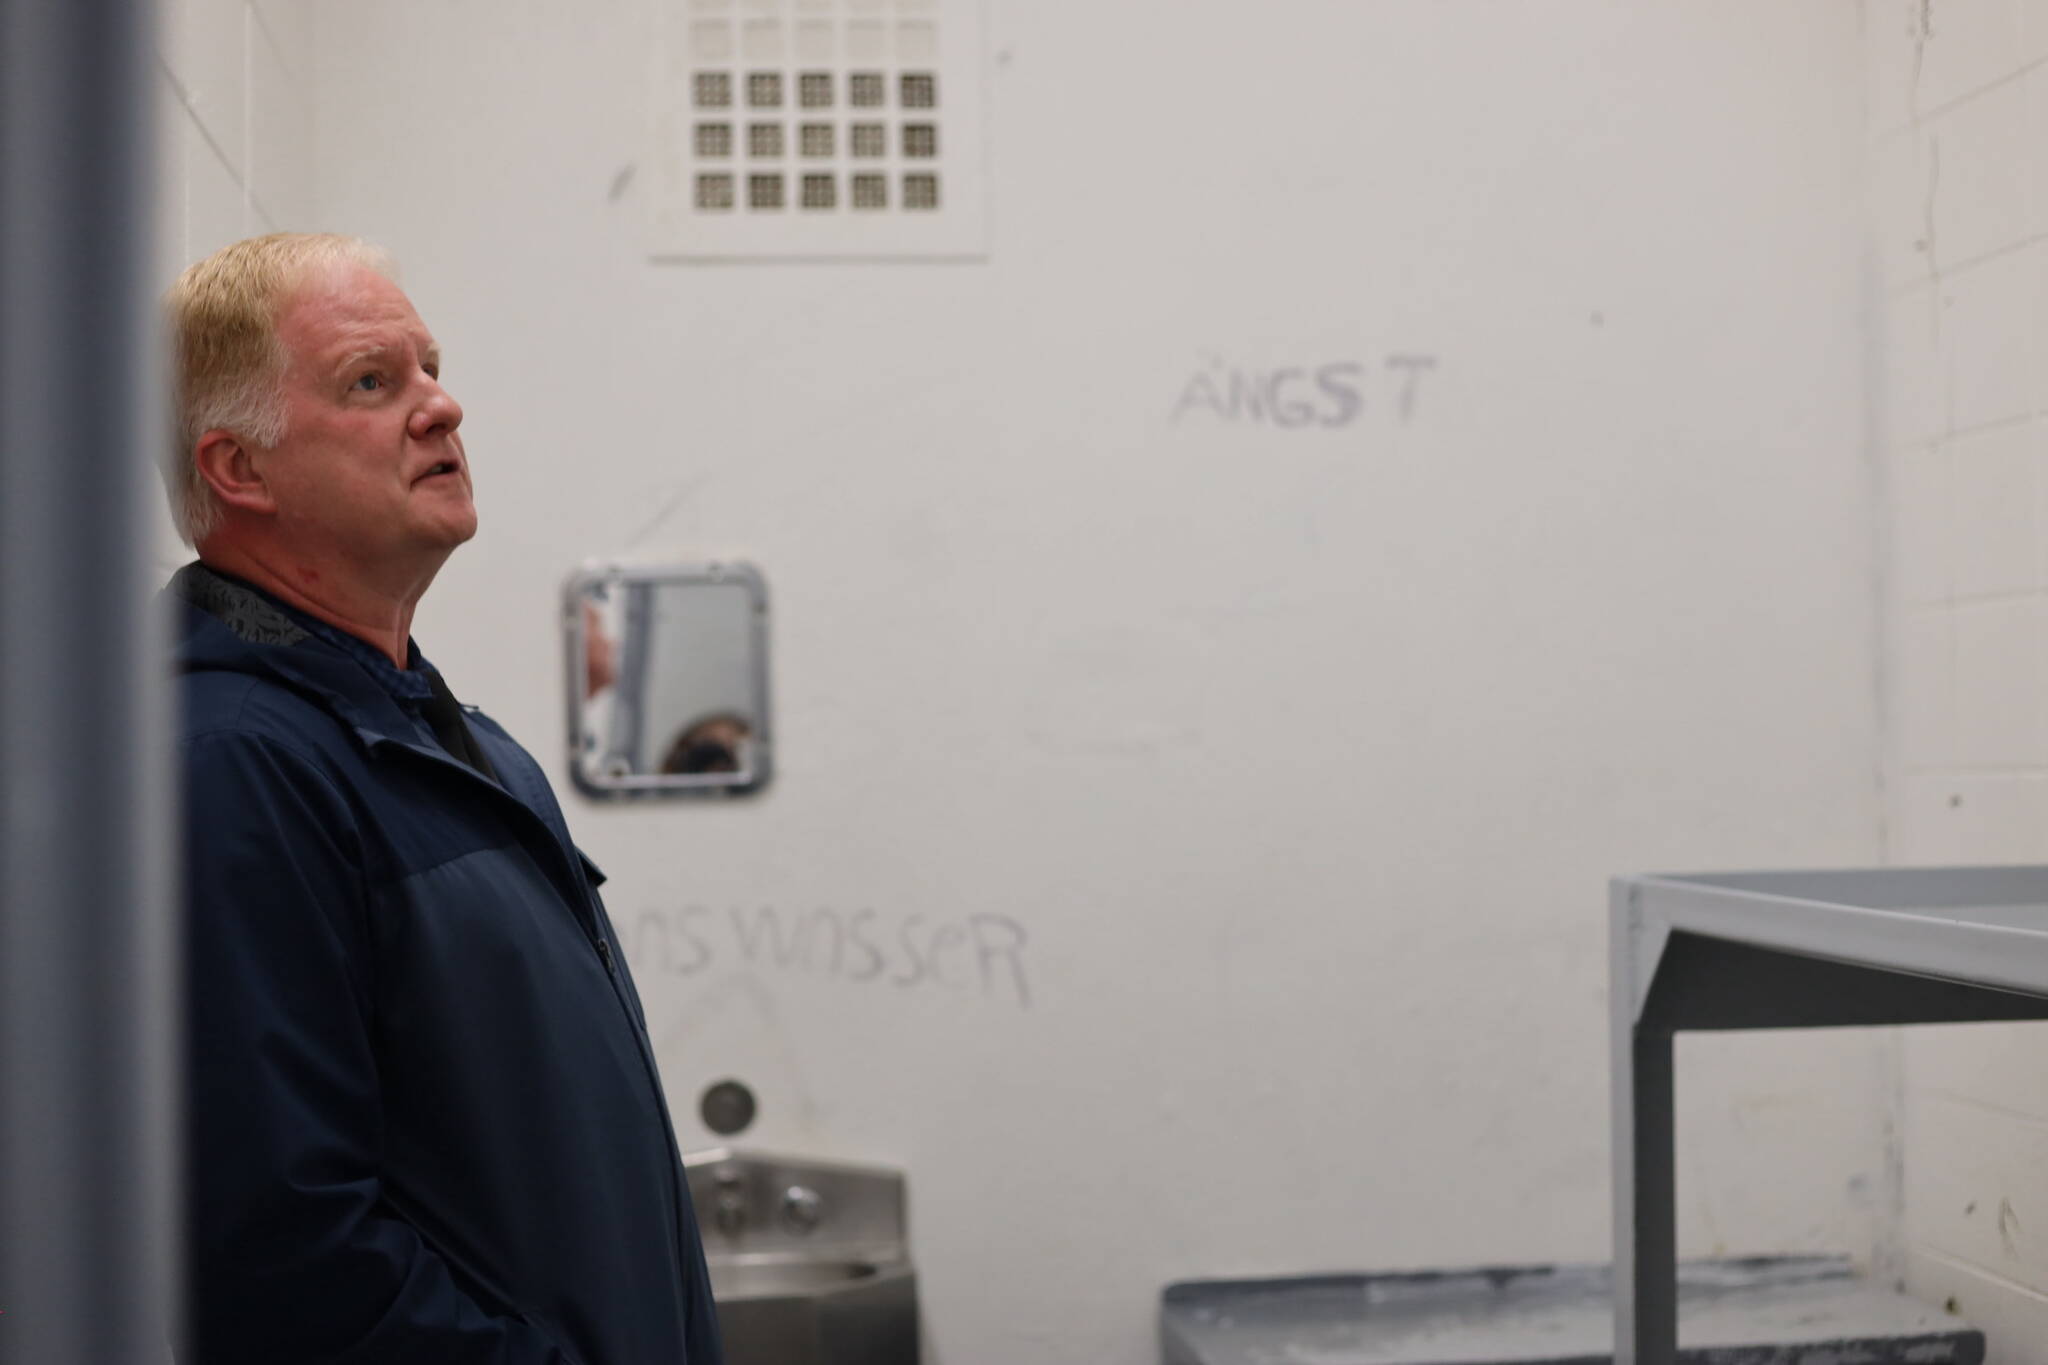 Lemon Creek Correctional Center Superintendent Bob Cordle examines cracks in the walls of a cell Monday. The prison is currently undergoing structural repairs and renovations following “extreme wet weather” last fall that caused instability at certain locations and prompted emergency repairs. (Clarise Larson / Juneau Empire)